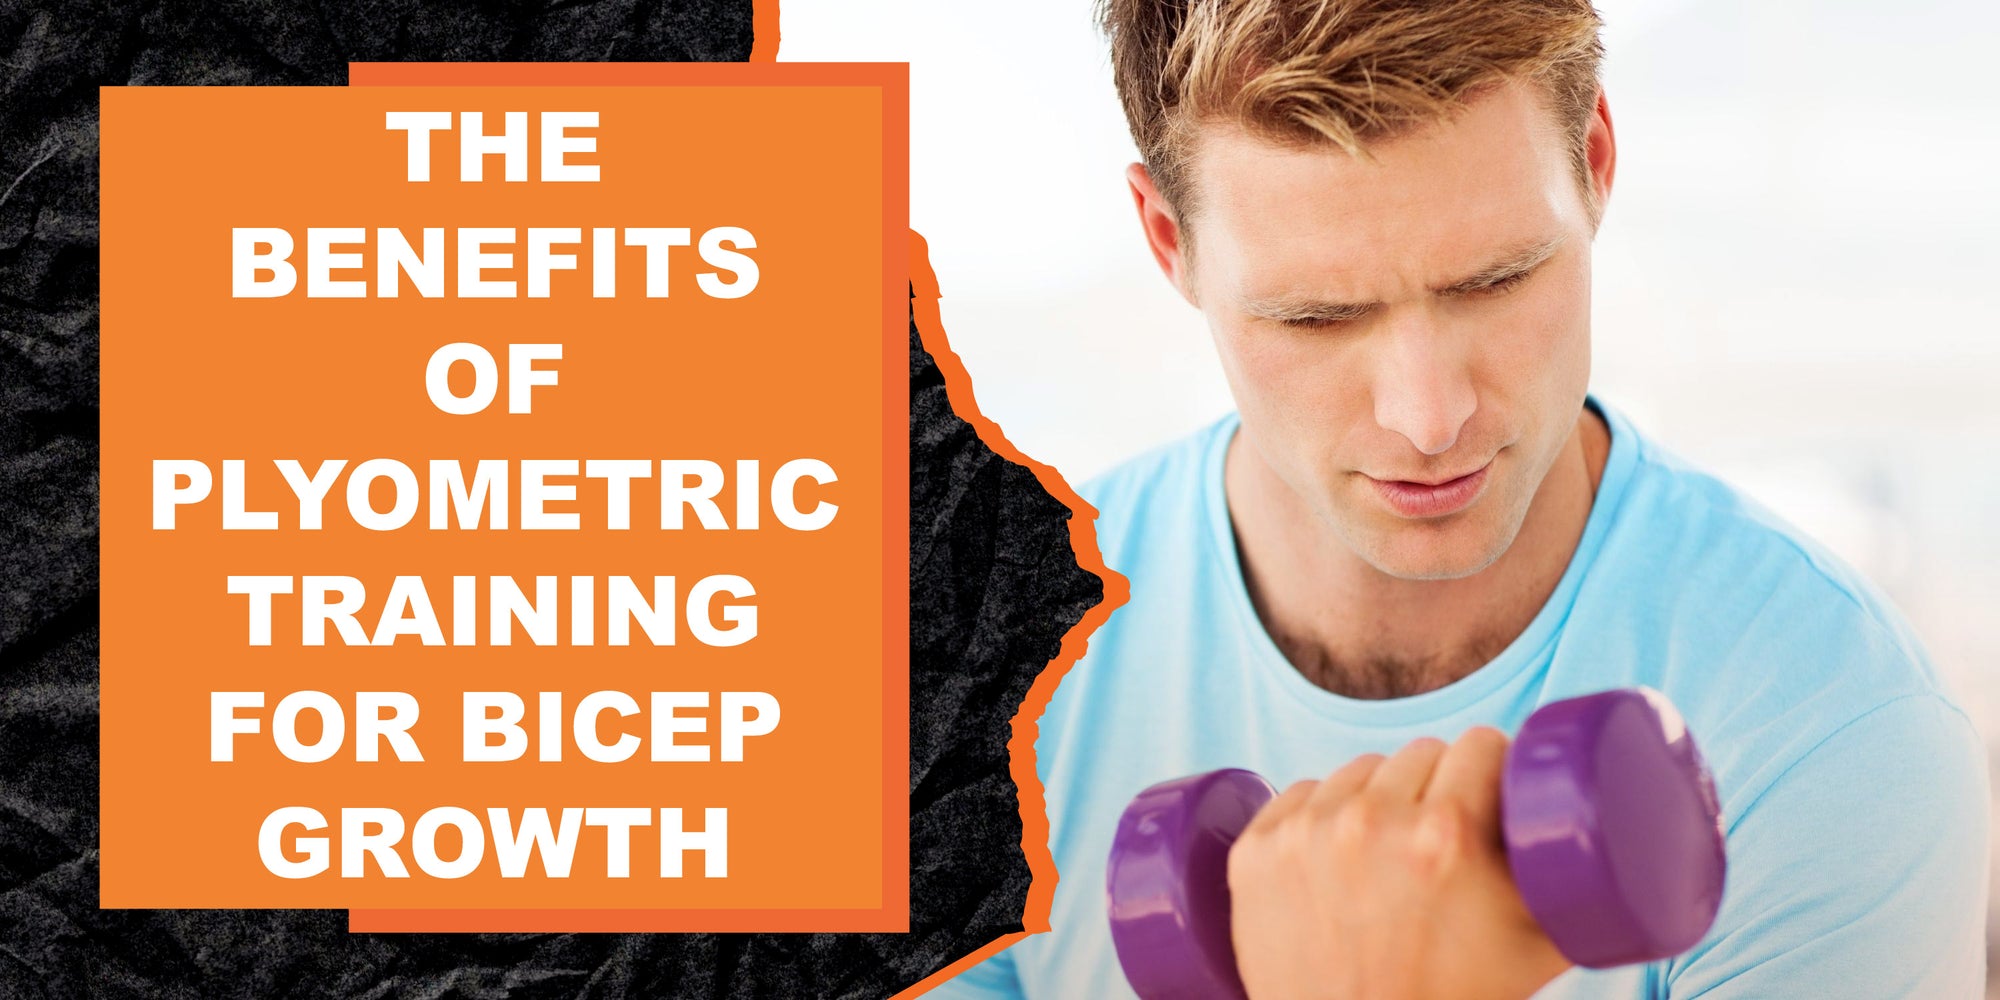 The Benefits of Plyometric Training for Bicep Growth